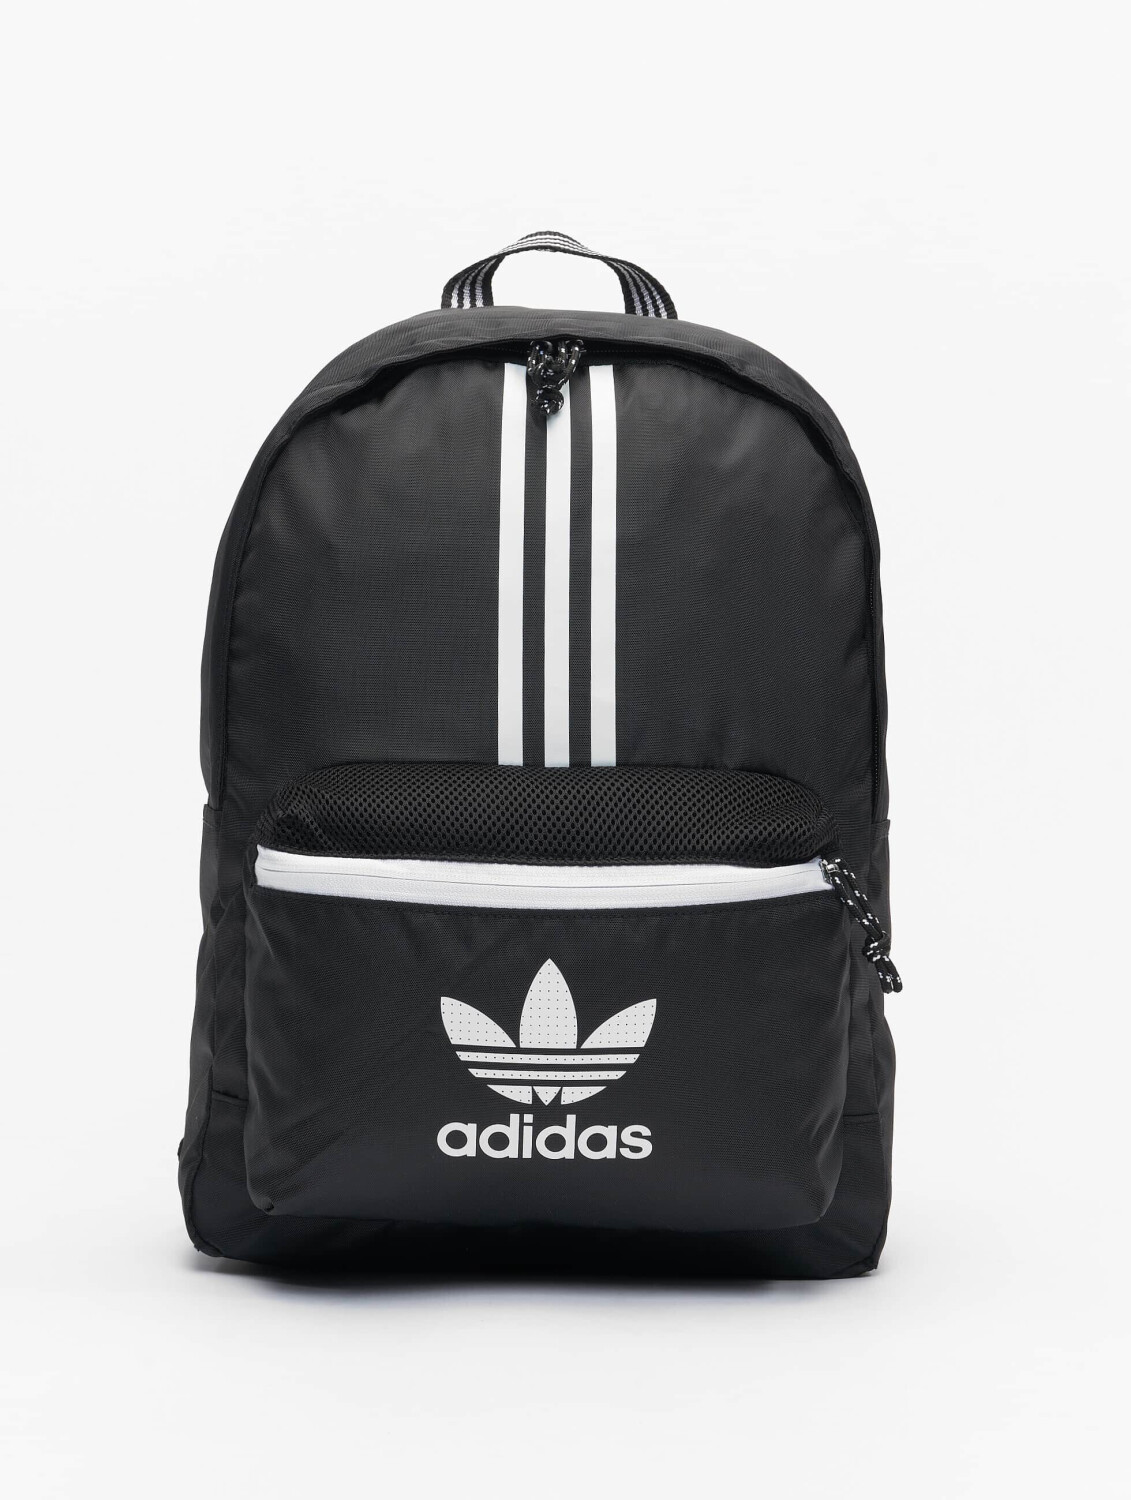 Buy Adidas Adicolor Classic Backpack black/white (H35532) from £24.94 ...